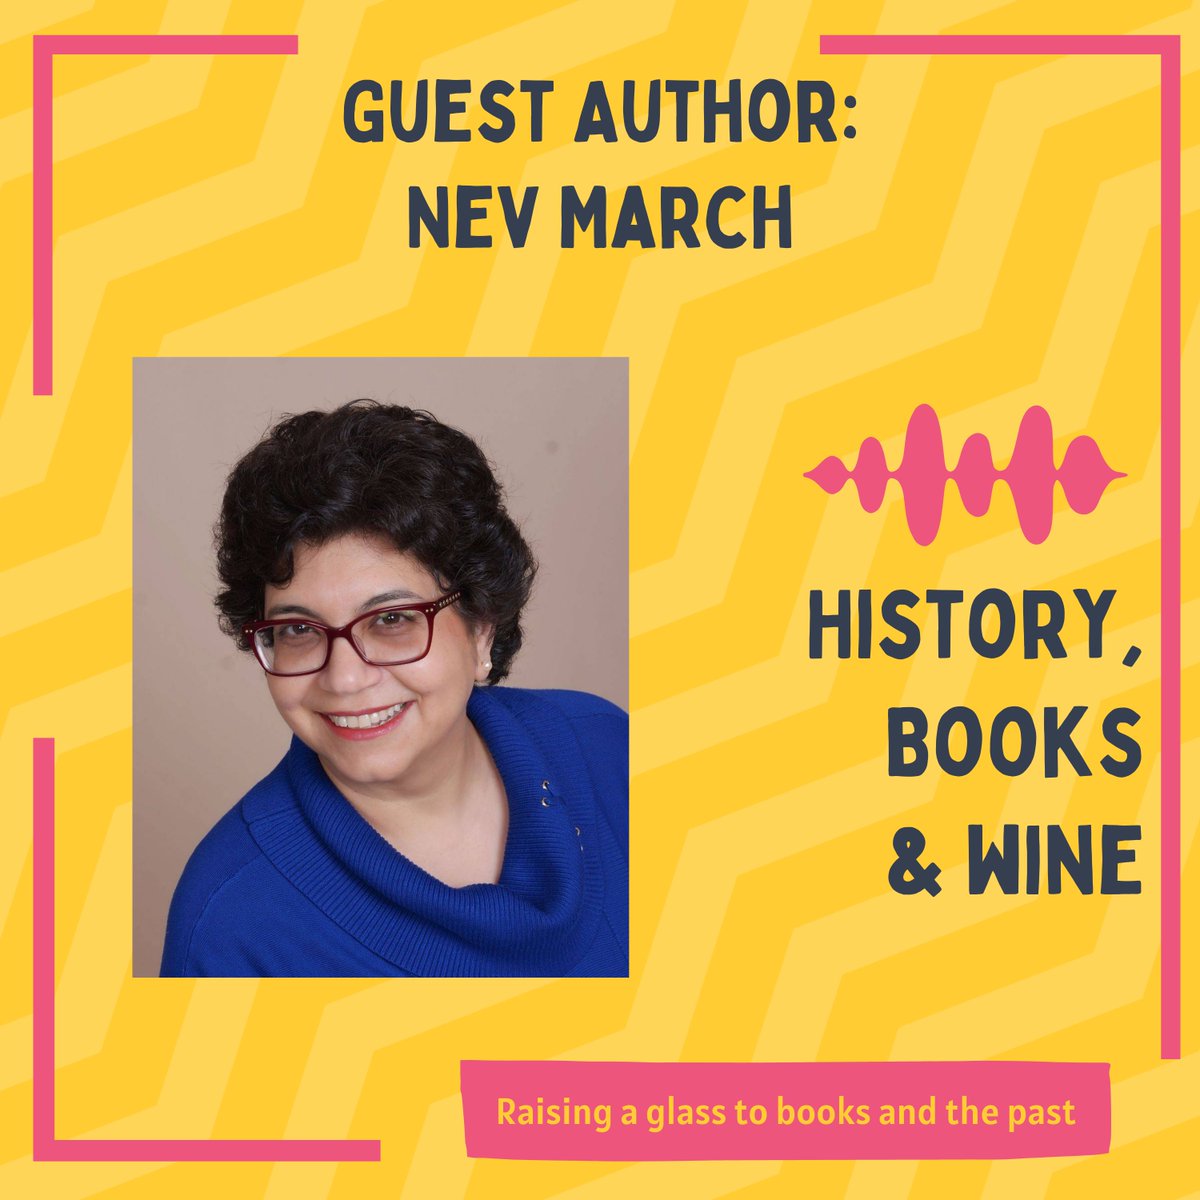 #happy to be a guest on @historybooksandwine #podcast with @ElizaKnightFiction n @loriannbailey #history #wine #winetasting #historyfunfacts #zoroastrian For a #spooky tradition, #1890s #transatlantic #steamships, #voyages & #criminal #investigations …orybooksandwinepodcast.buzzsprout.com/share